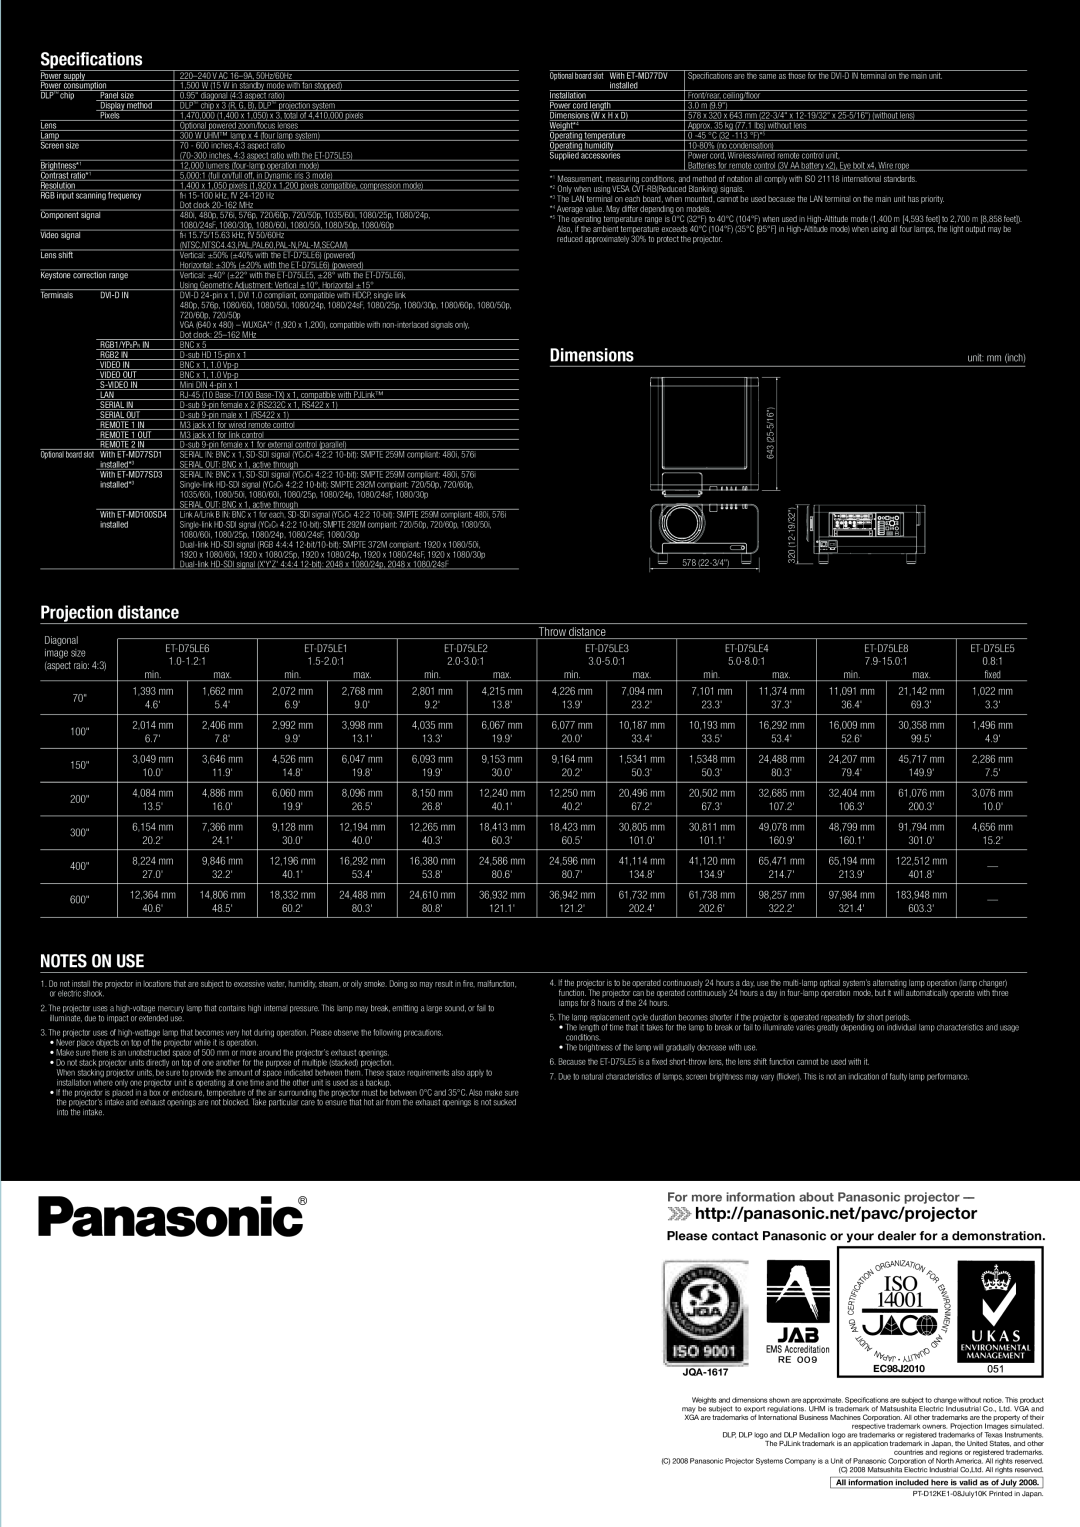 Panasonic PT-D12000E Specifications, Dimensions, Projection distance, Notes On Use, http//panasonic.net/pavc/projector 